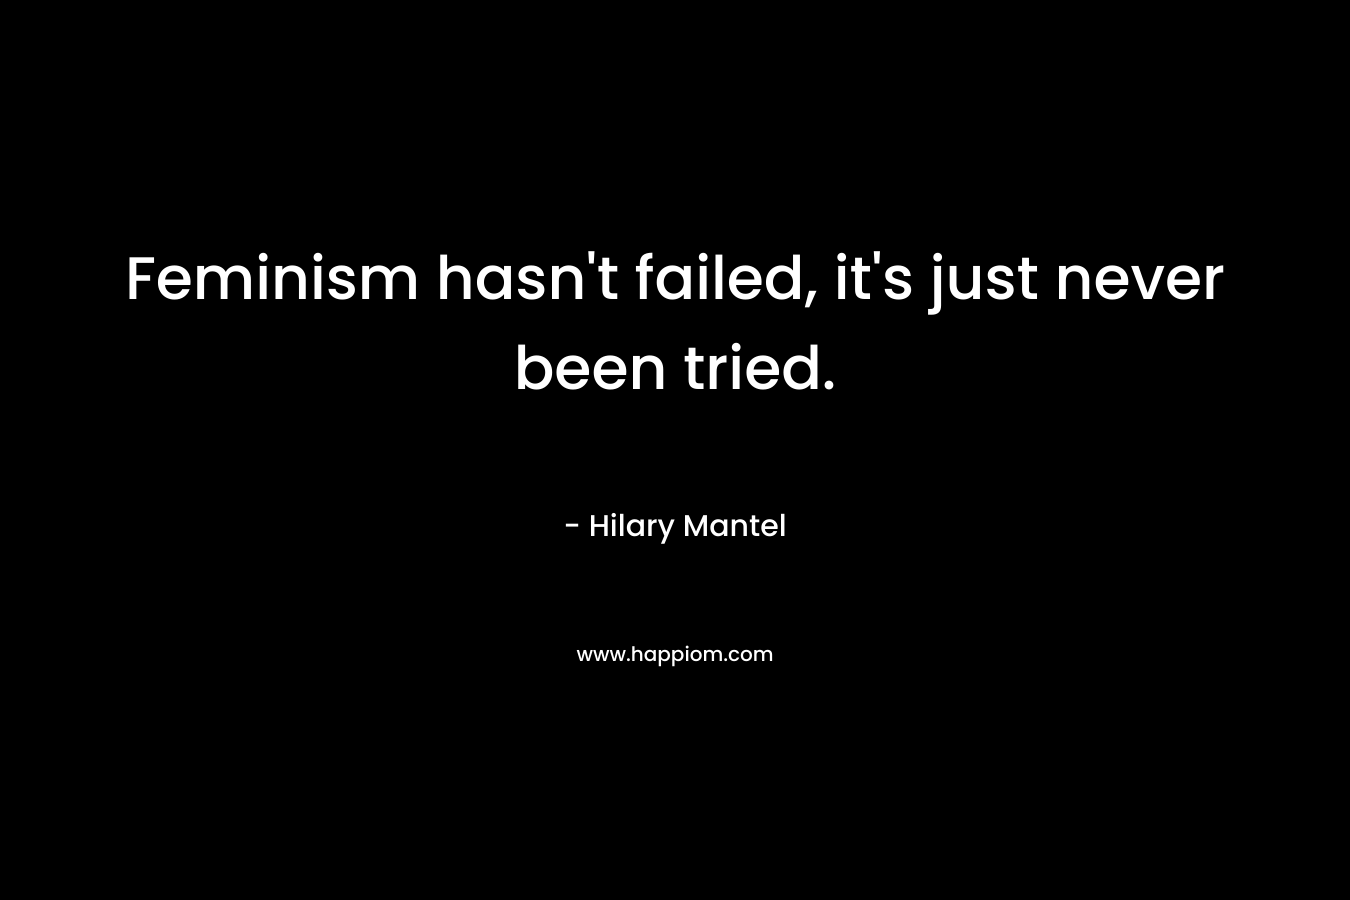 Feminism hasn't failed, it's just never been tried.